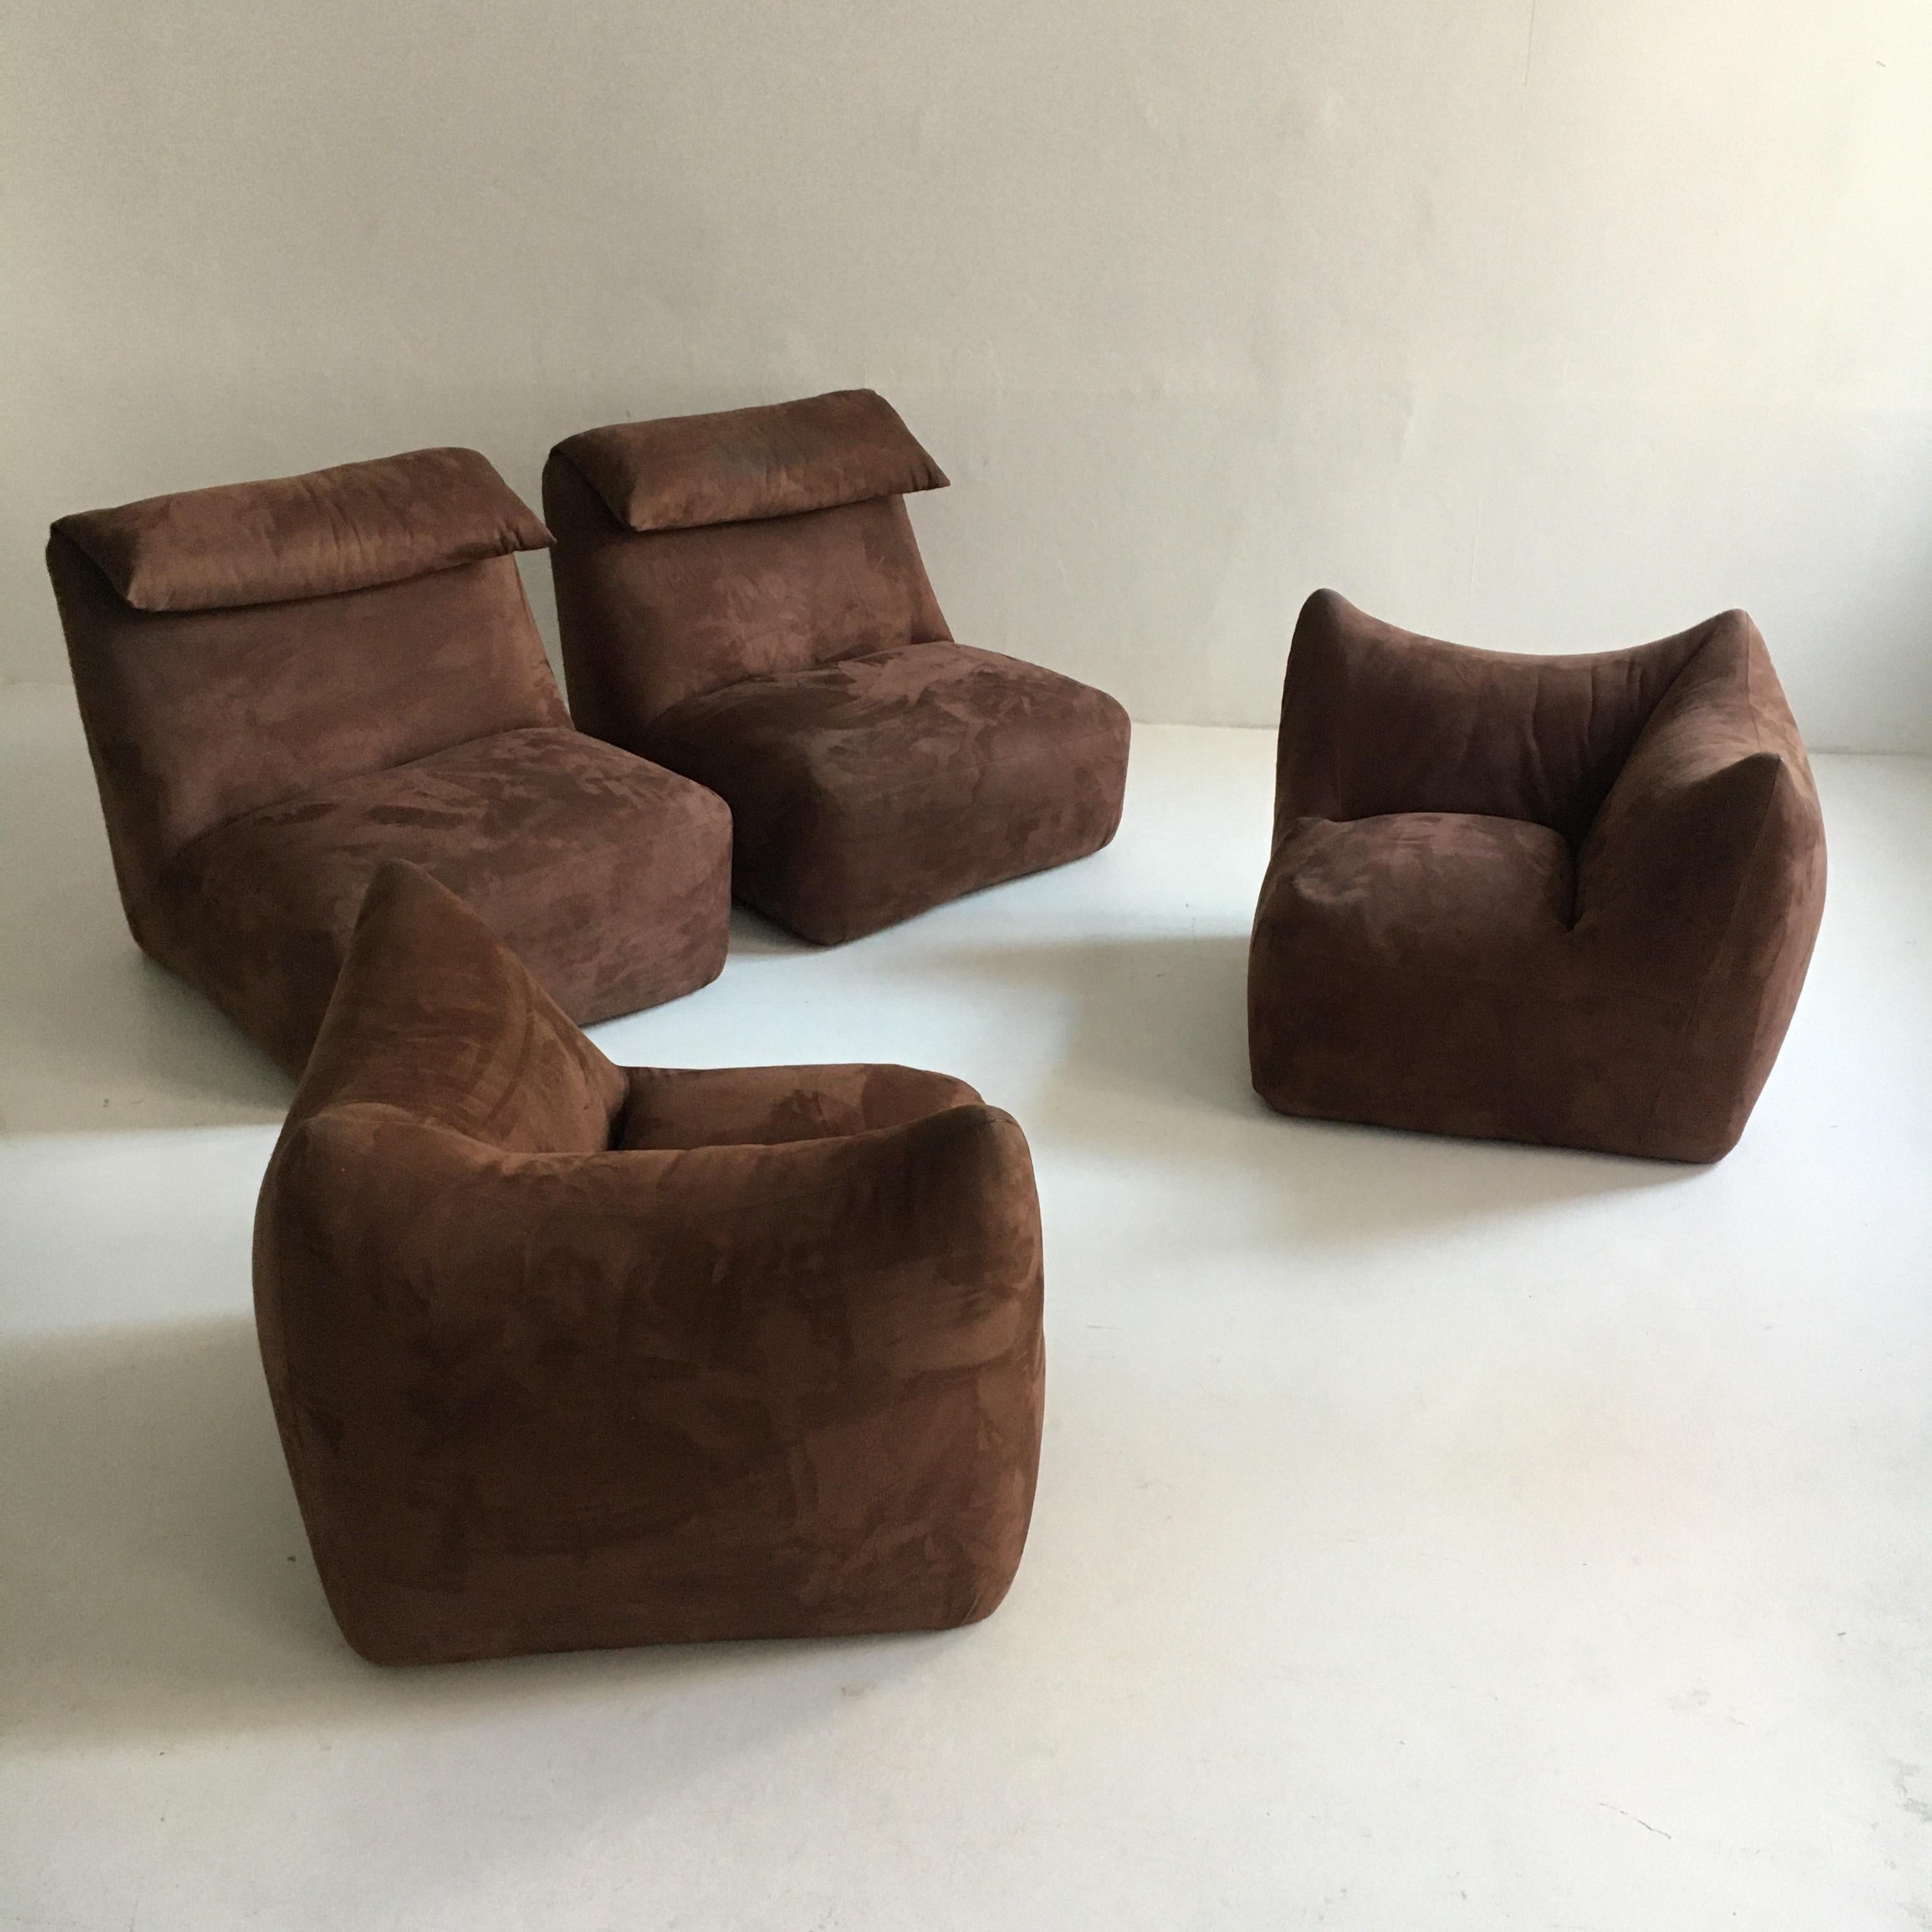 Mario Bellini 'Le Bambole' Two Modular Elements, Pair of Lounge Chairs, Italy 5